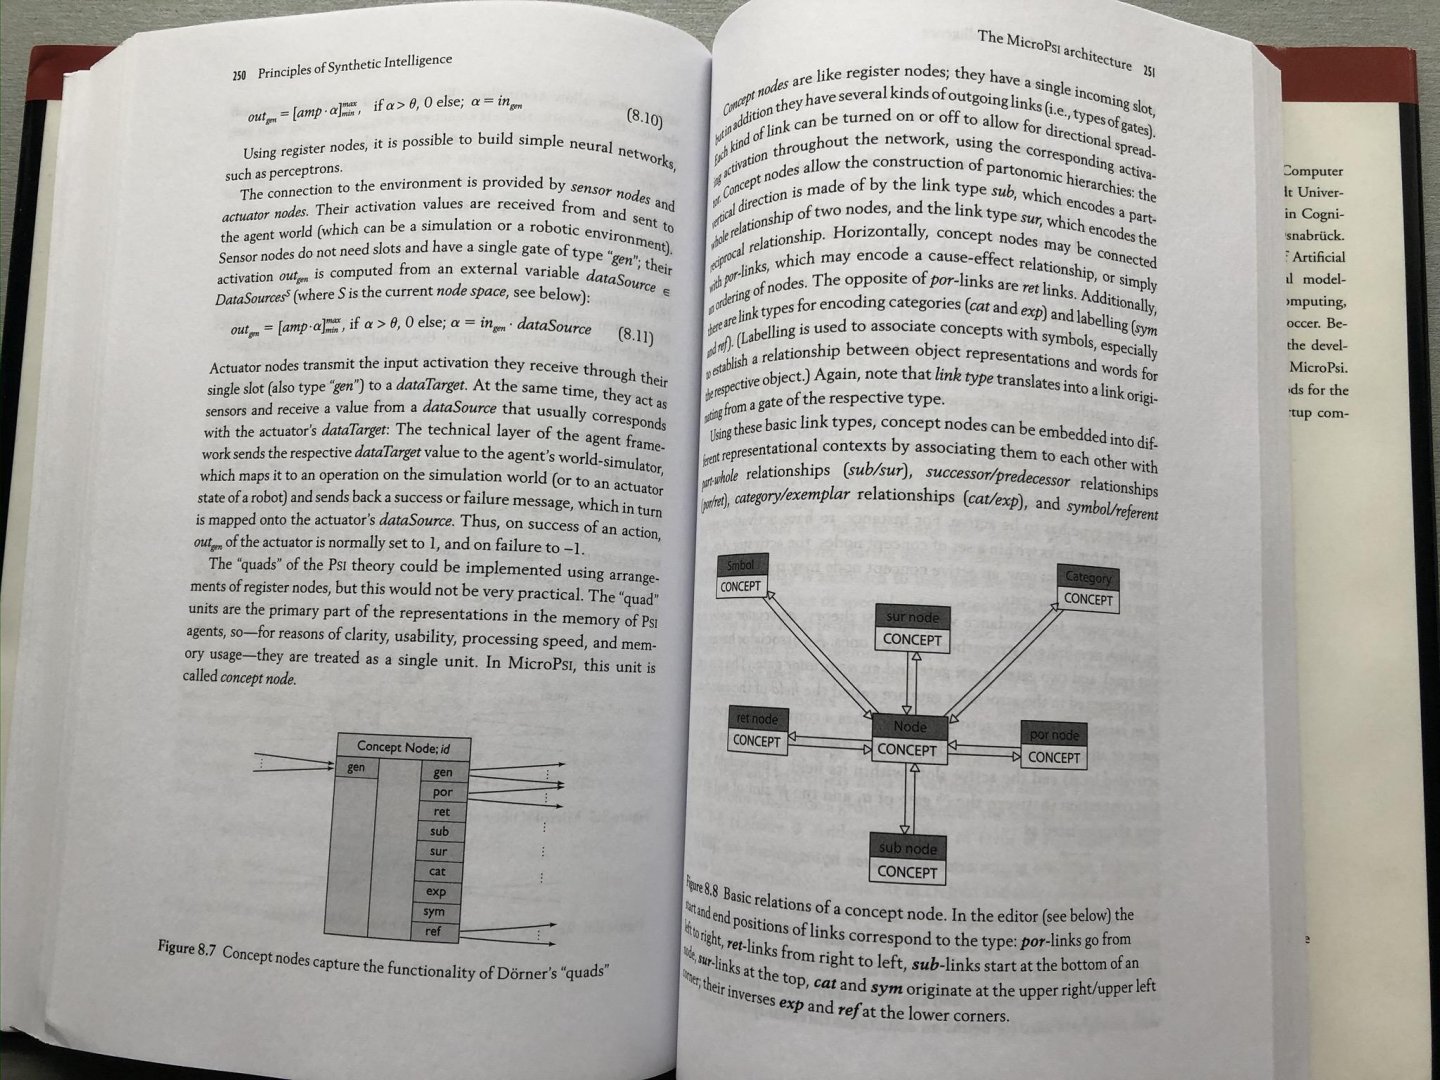 Bach, Joscha - Principles of Synthetic Intelligence. PSI: An Architecture of Motivated Cognition